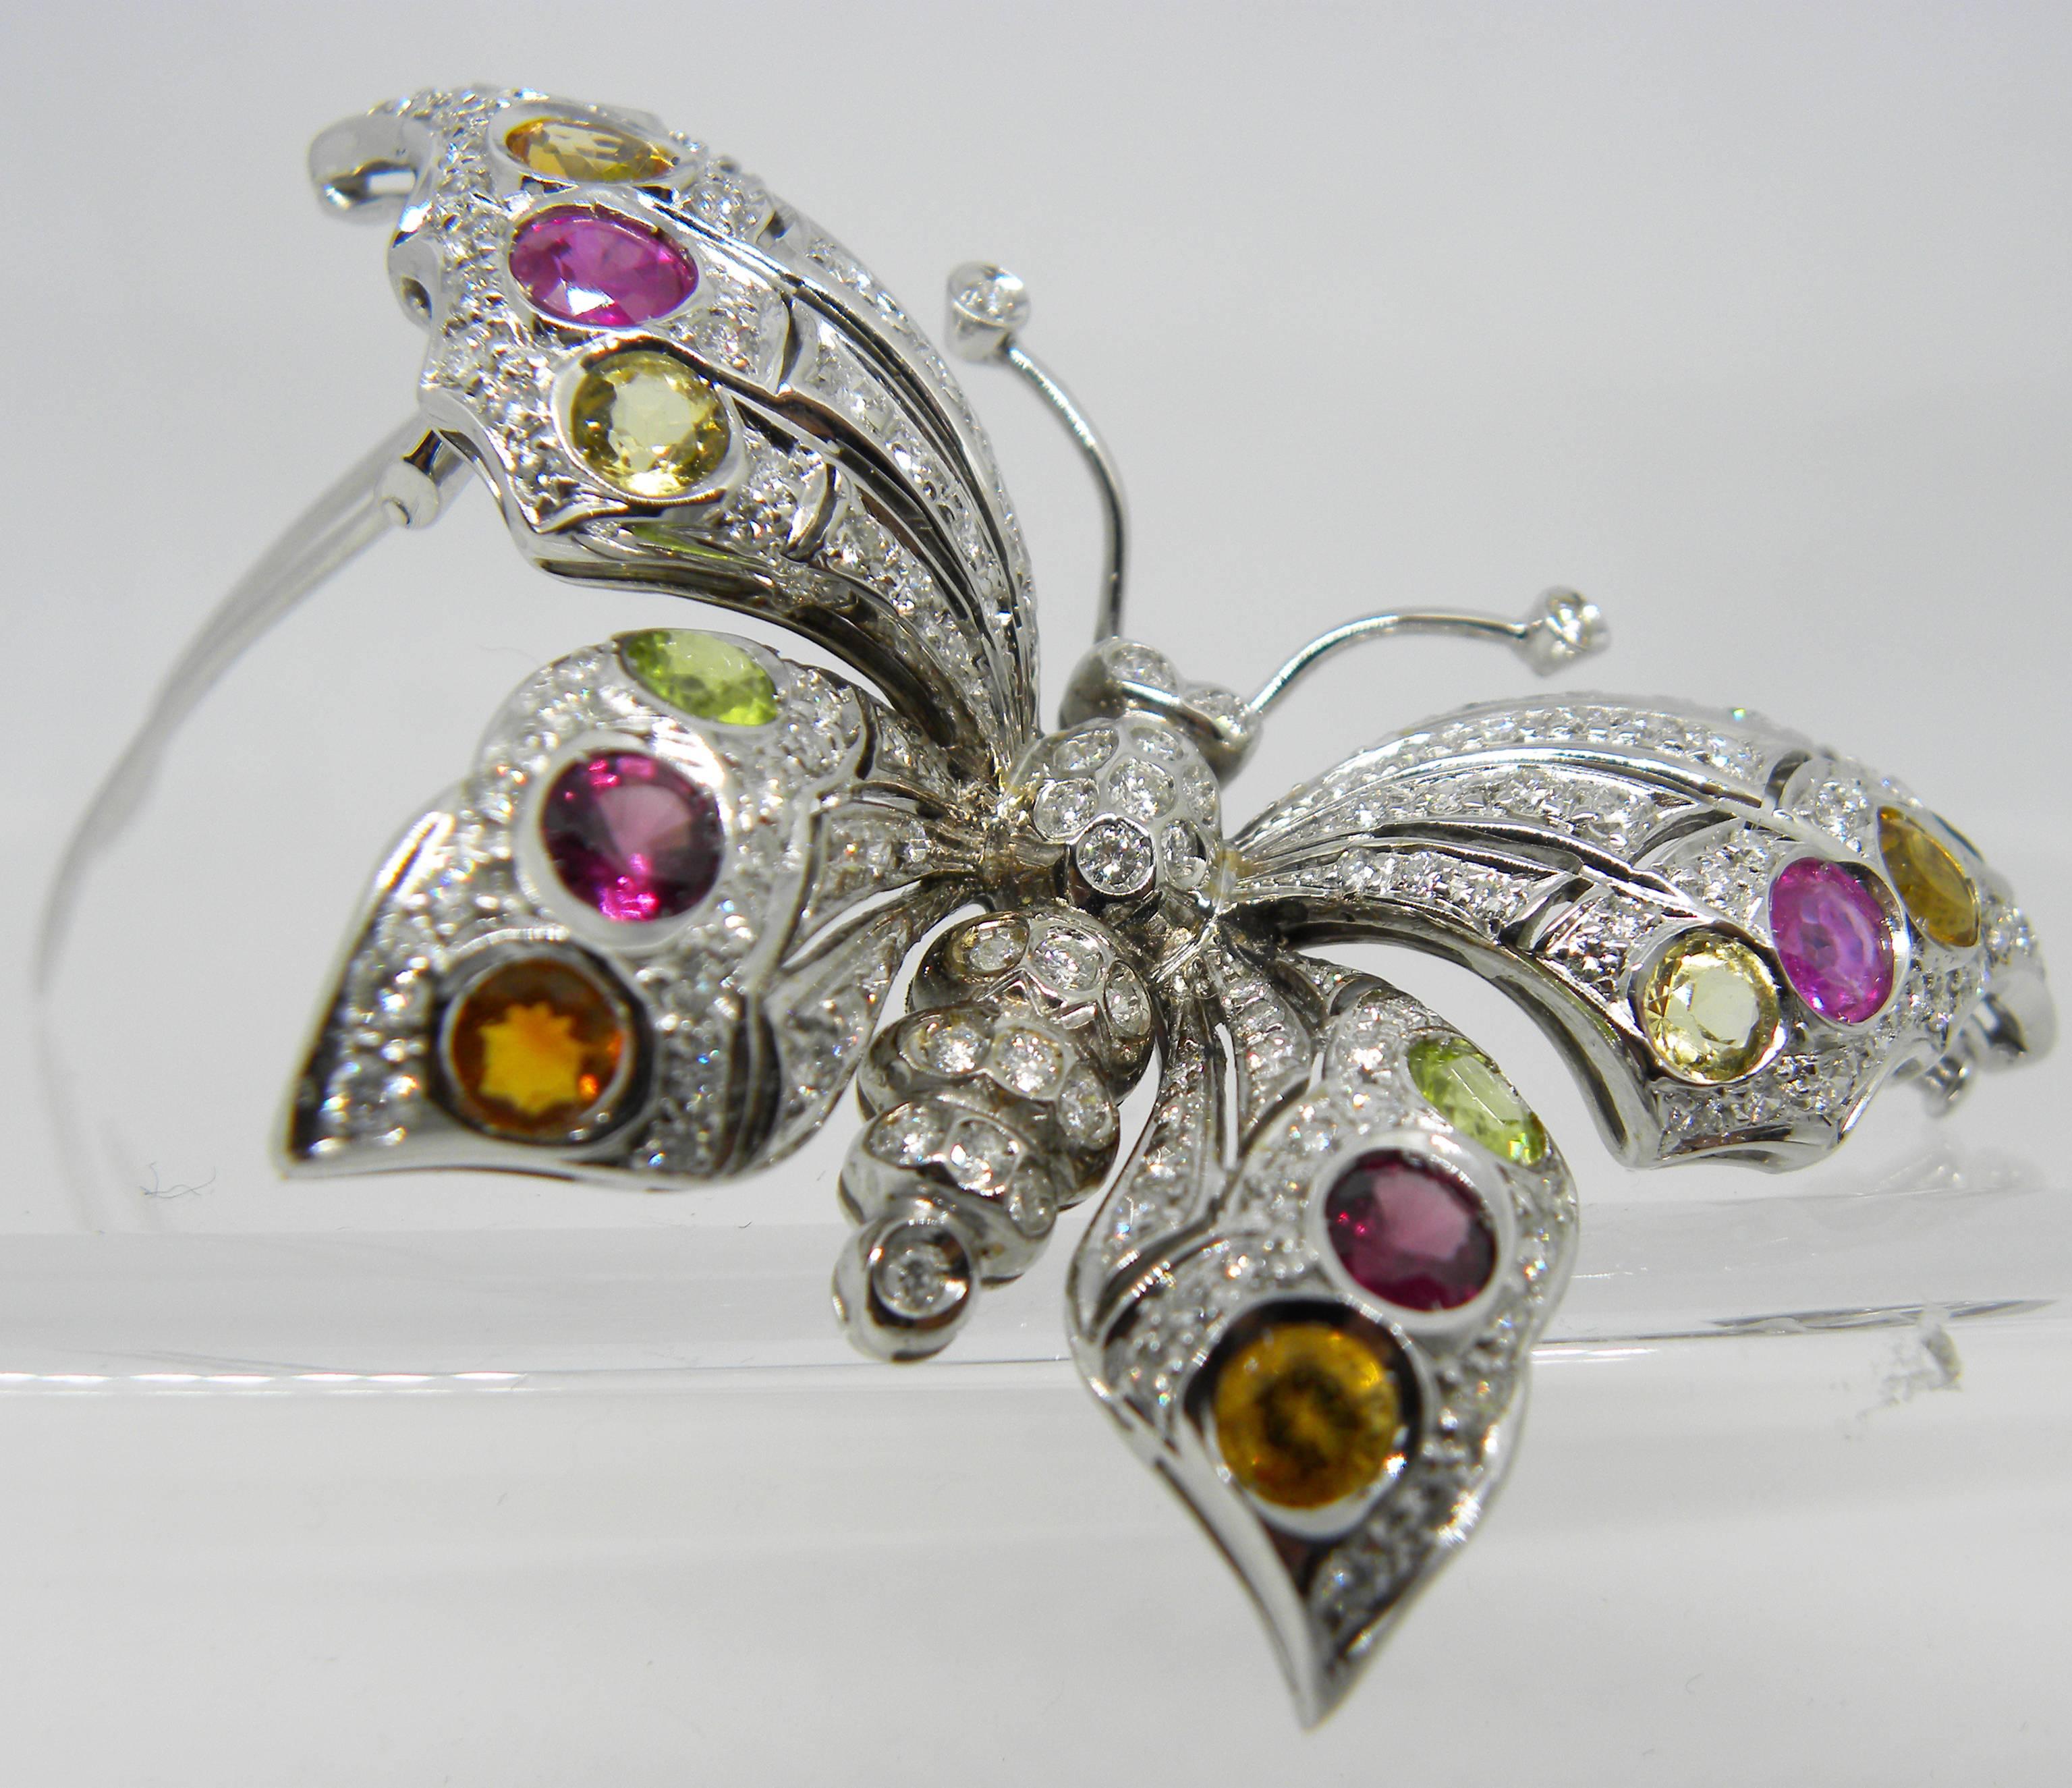 One-of a-kind Original 80's, 2.45 Carat D-E, IF Top Quality White Diamond, 1.30 Carat Red Pink and Green Natural Tourmaline, 7.20 Carat Peridot, Citrine Quartz, 18 Carat White Gold Setting Extraordinary  Brooch.
This unique jewel can be worn also as